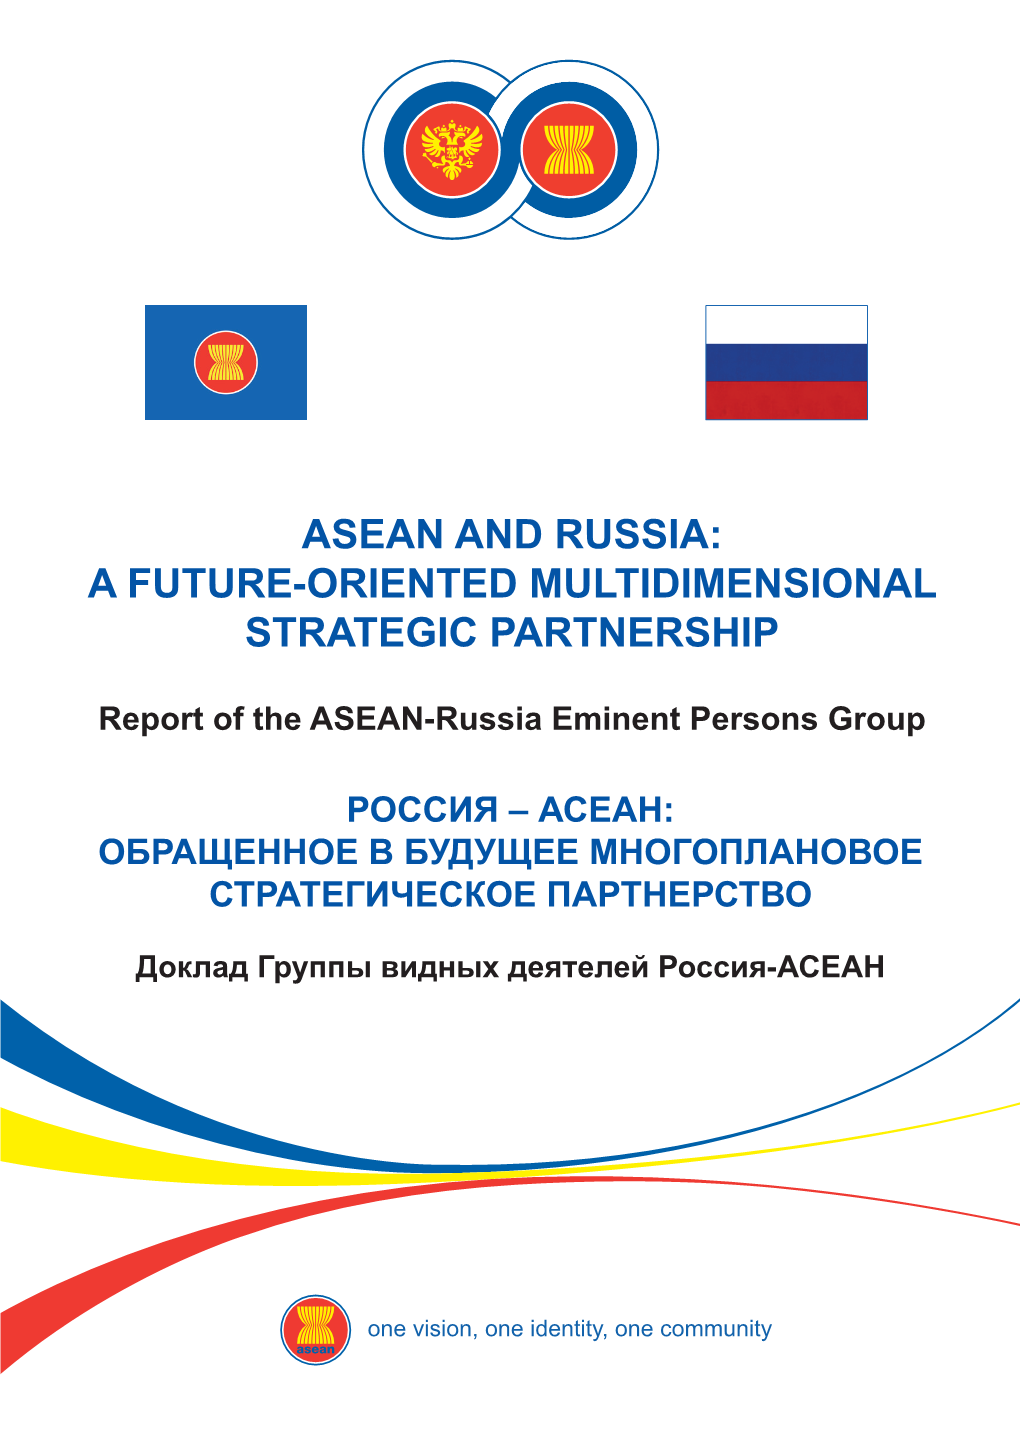 ASEAN-Russia Eminent Persons Group